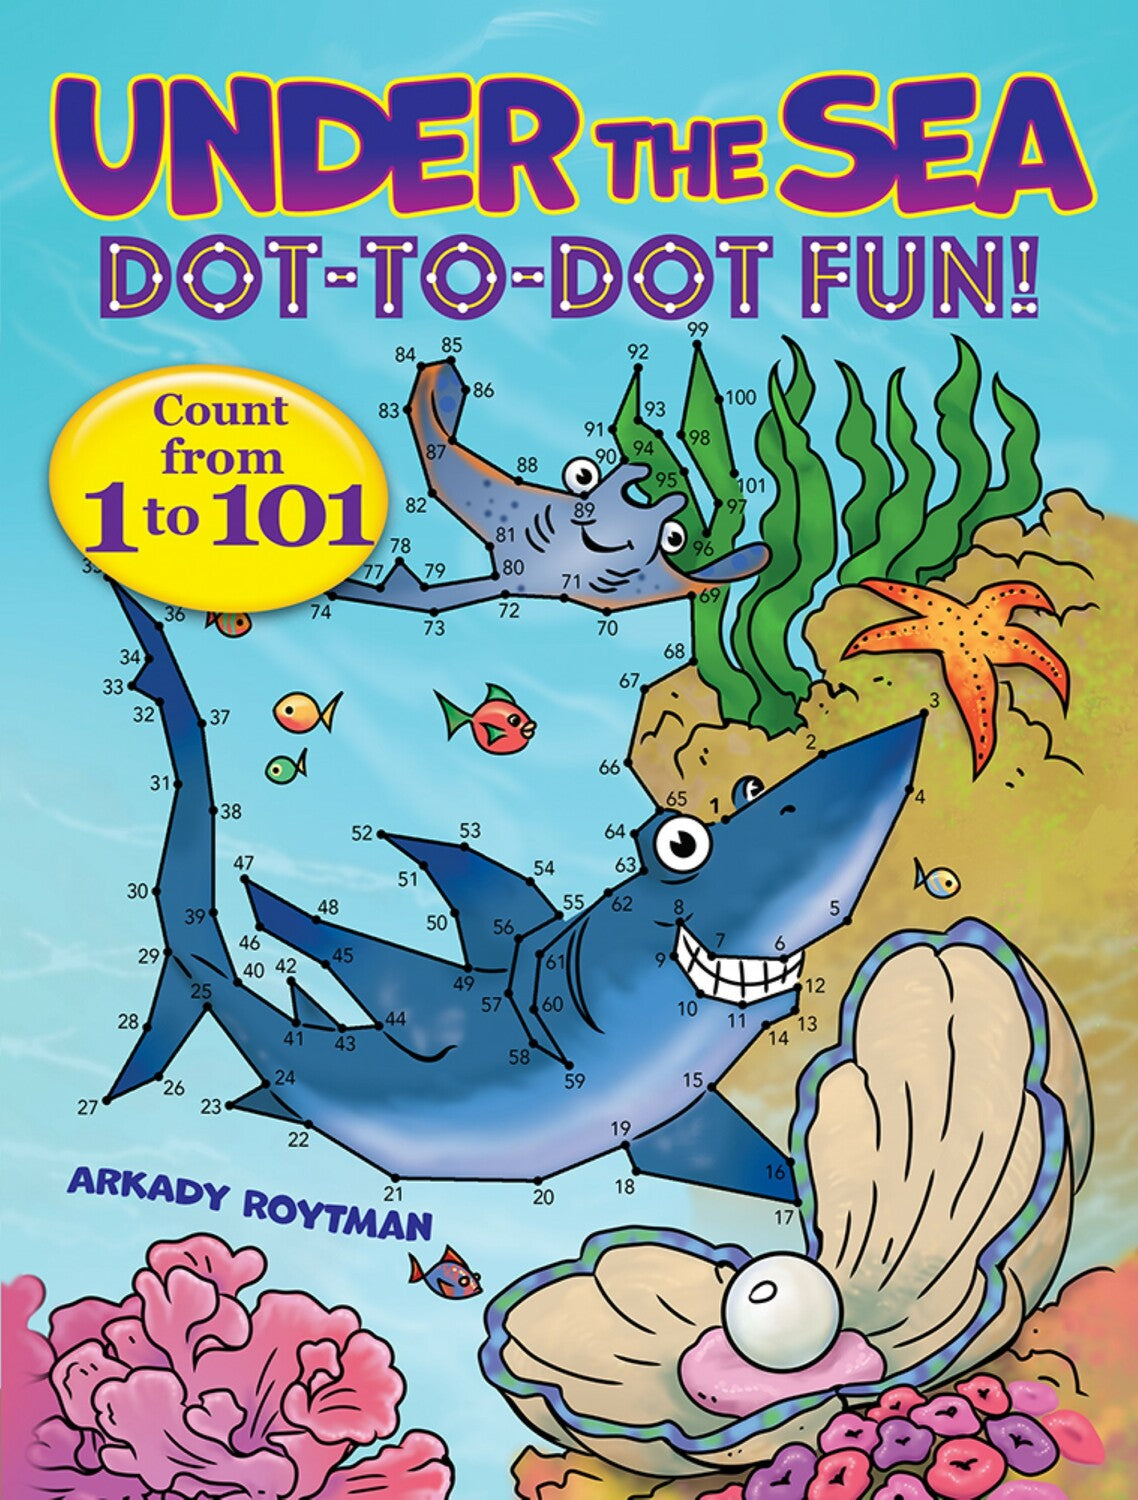 Under the Sea Dot-to-Dot Fun!: Count from 1 to 101